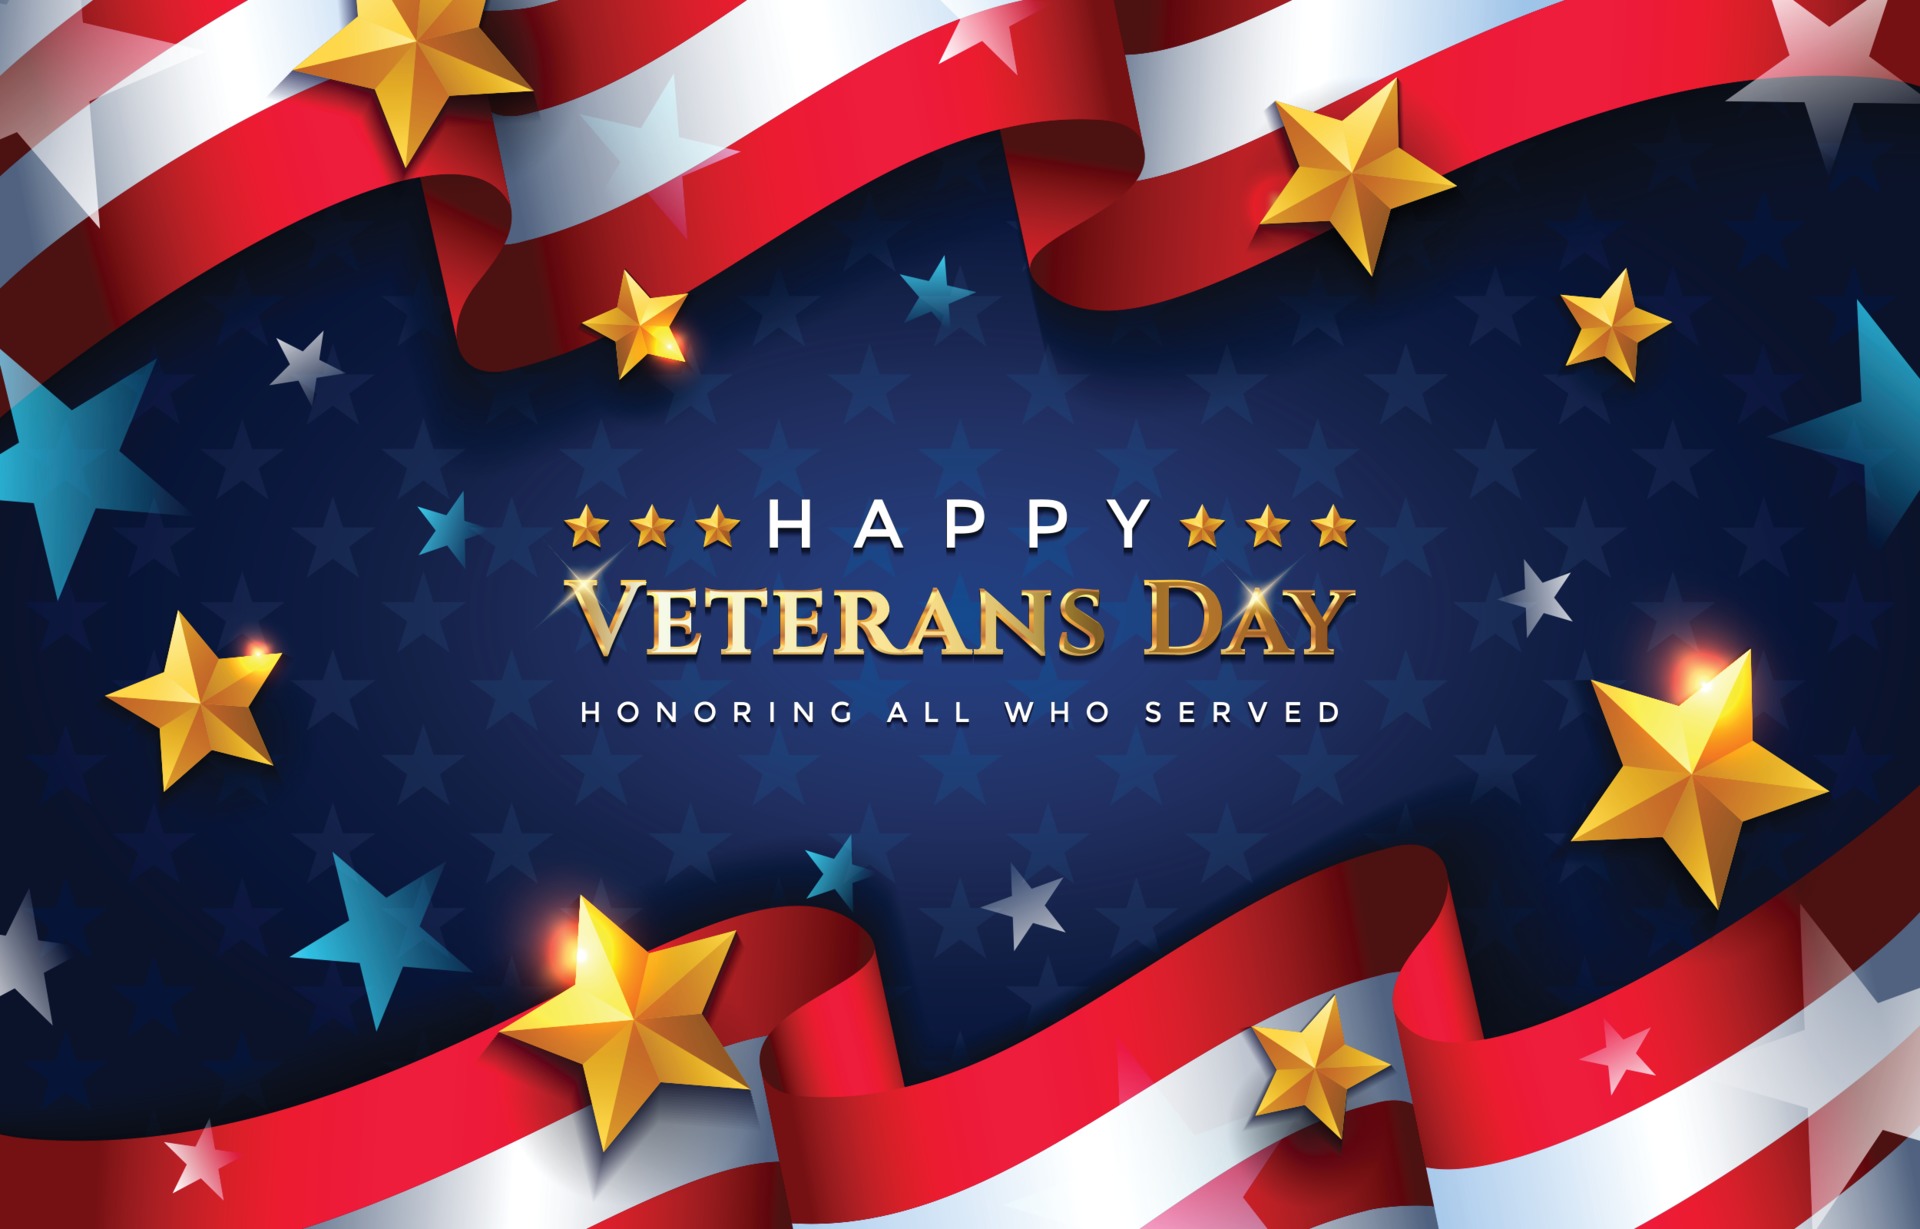 Veterans day. Veterans Day background images. Day with Stars.